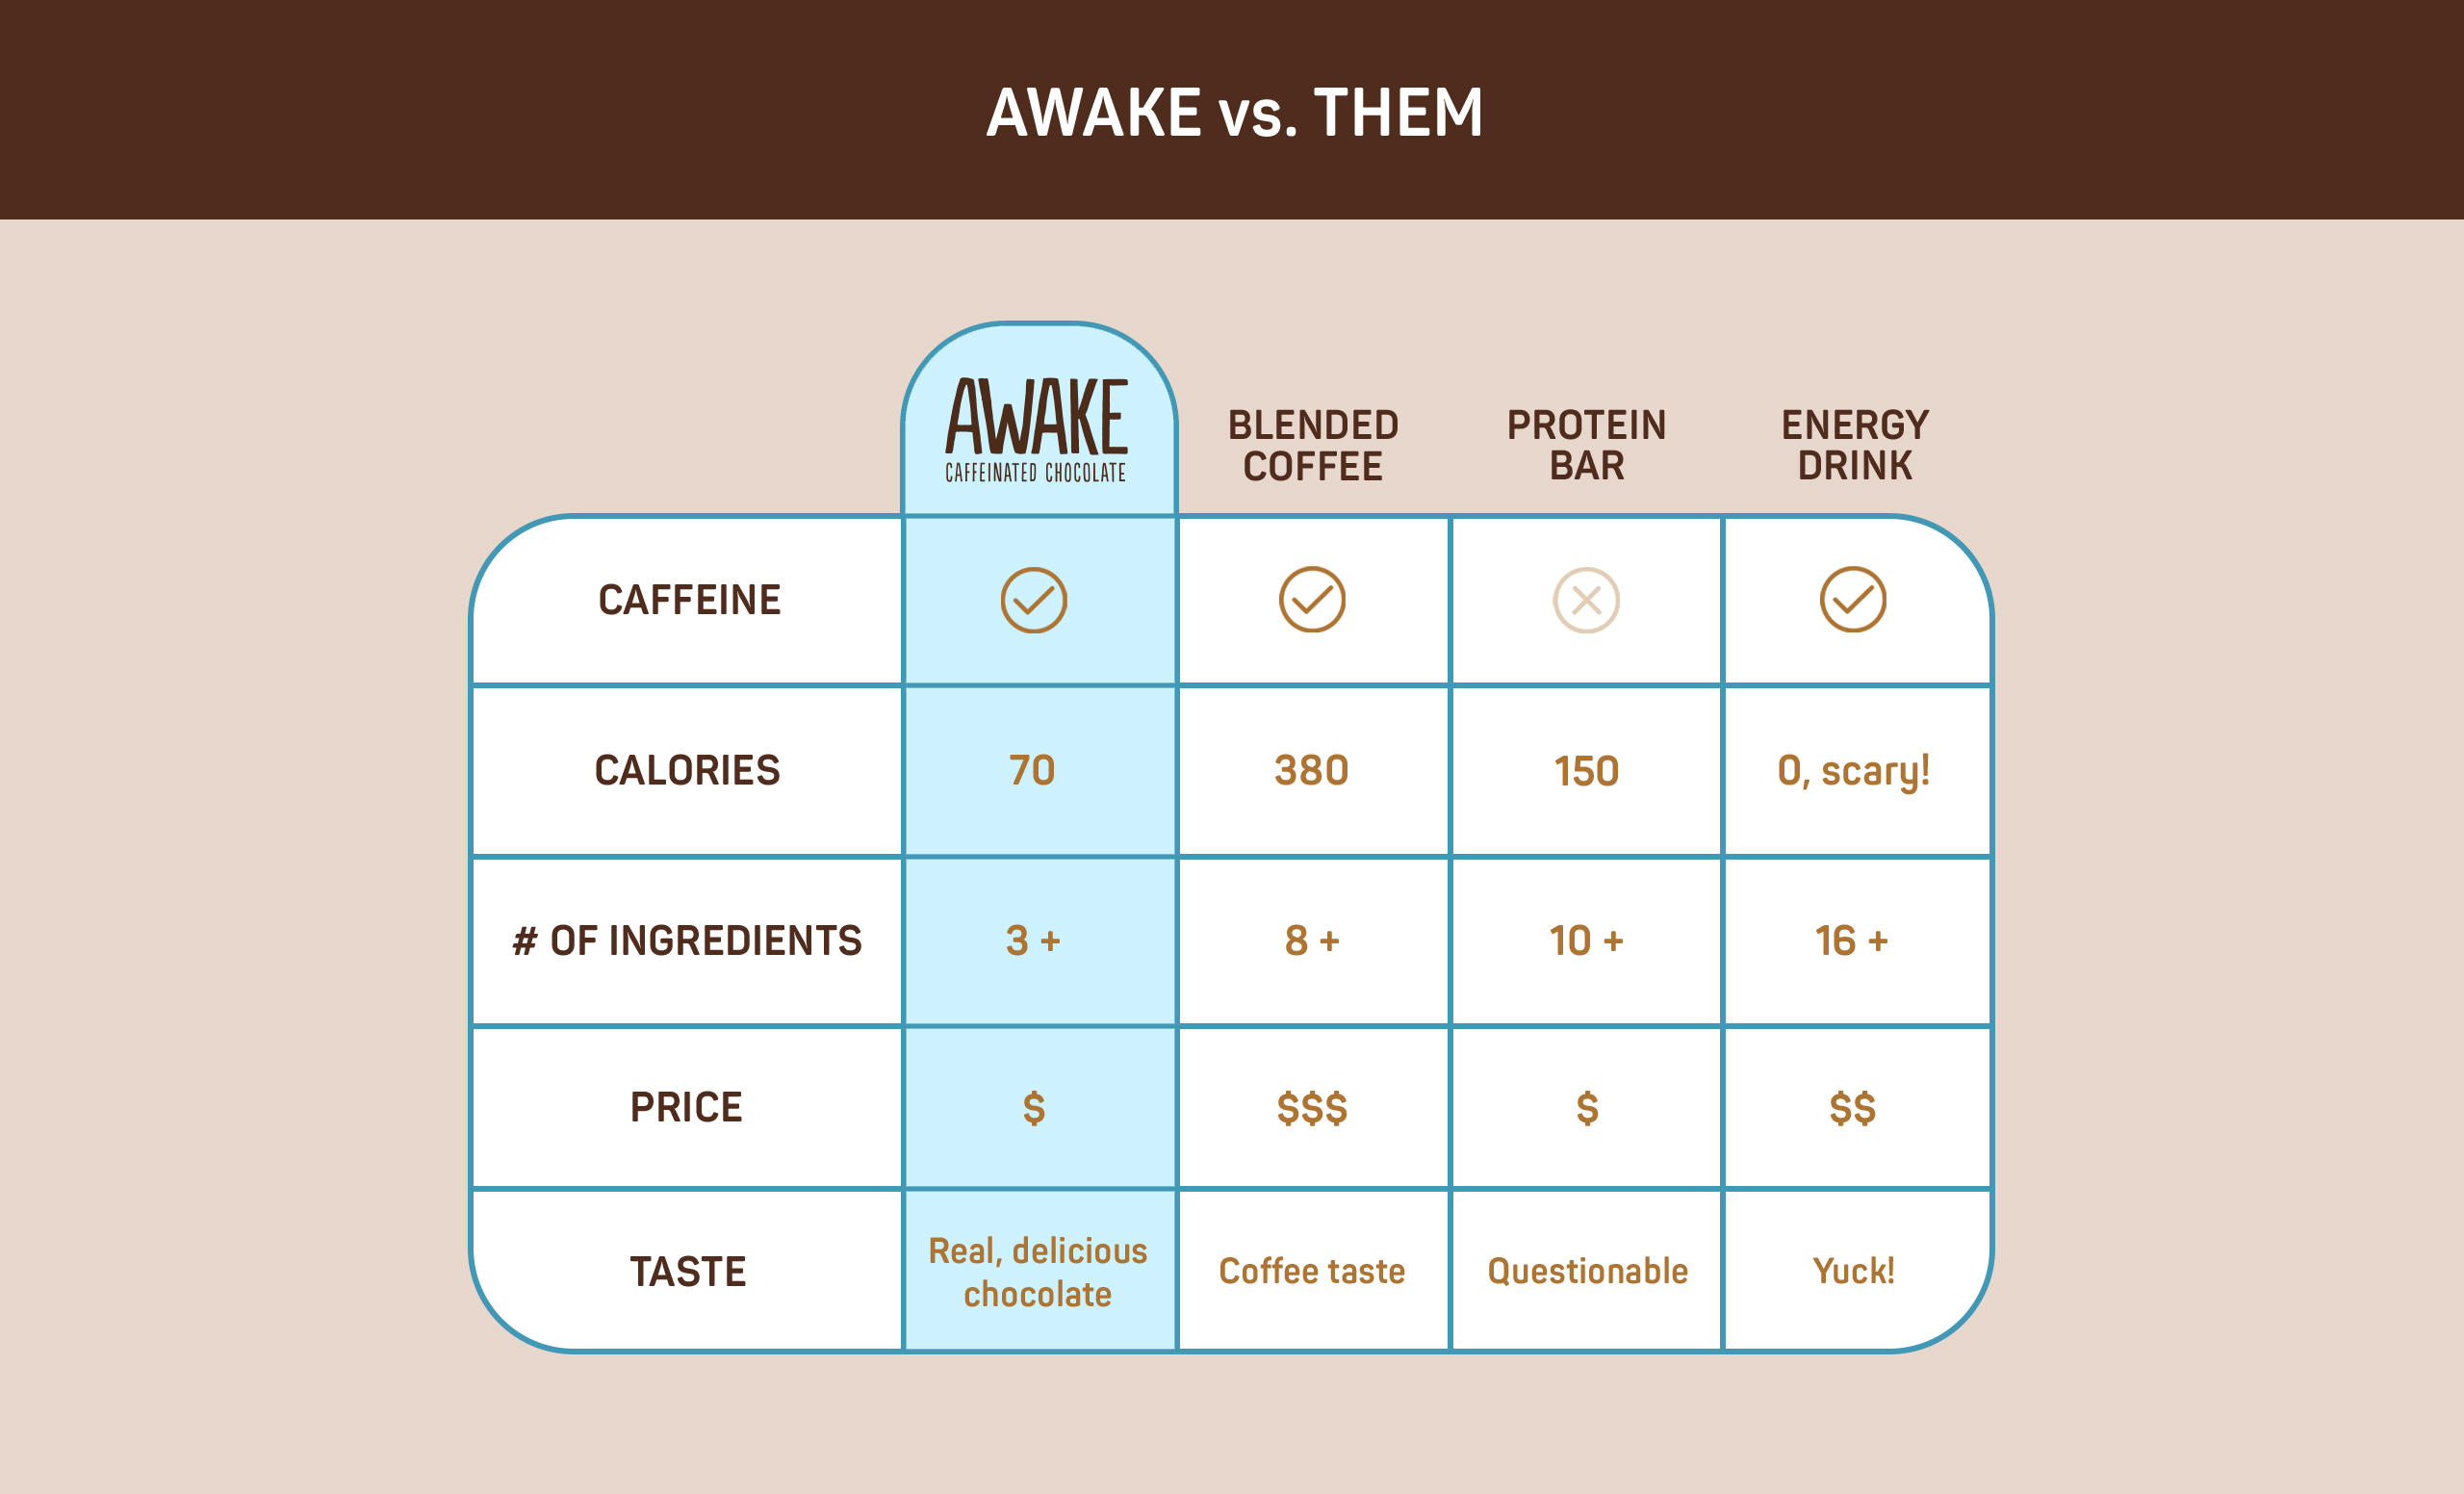 A chart comparing products: Awake, regular blended coffee, protein bars and energy drinks. Comparing caffeine, calories, number of ingredients, price and taste.